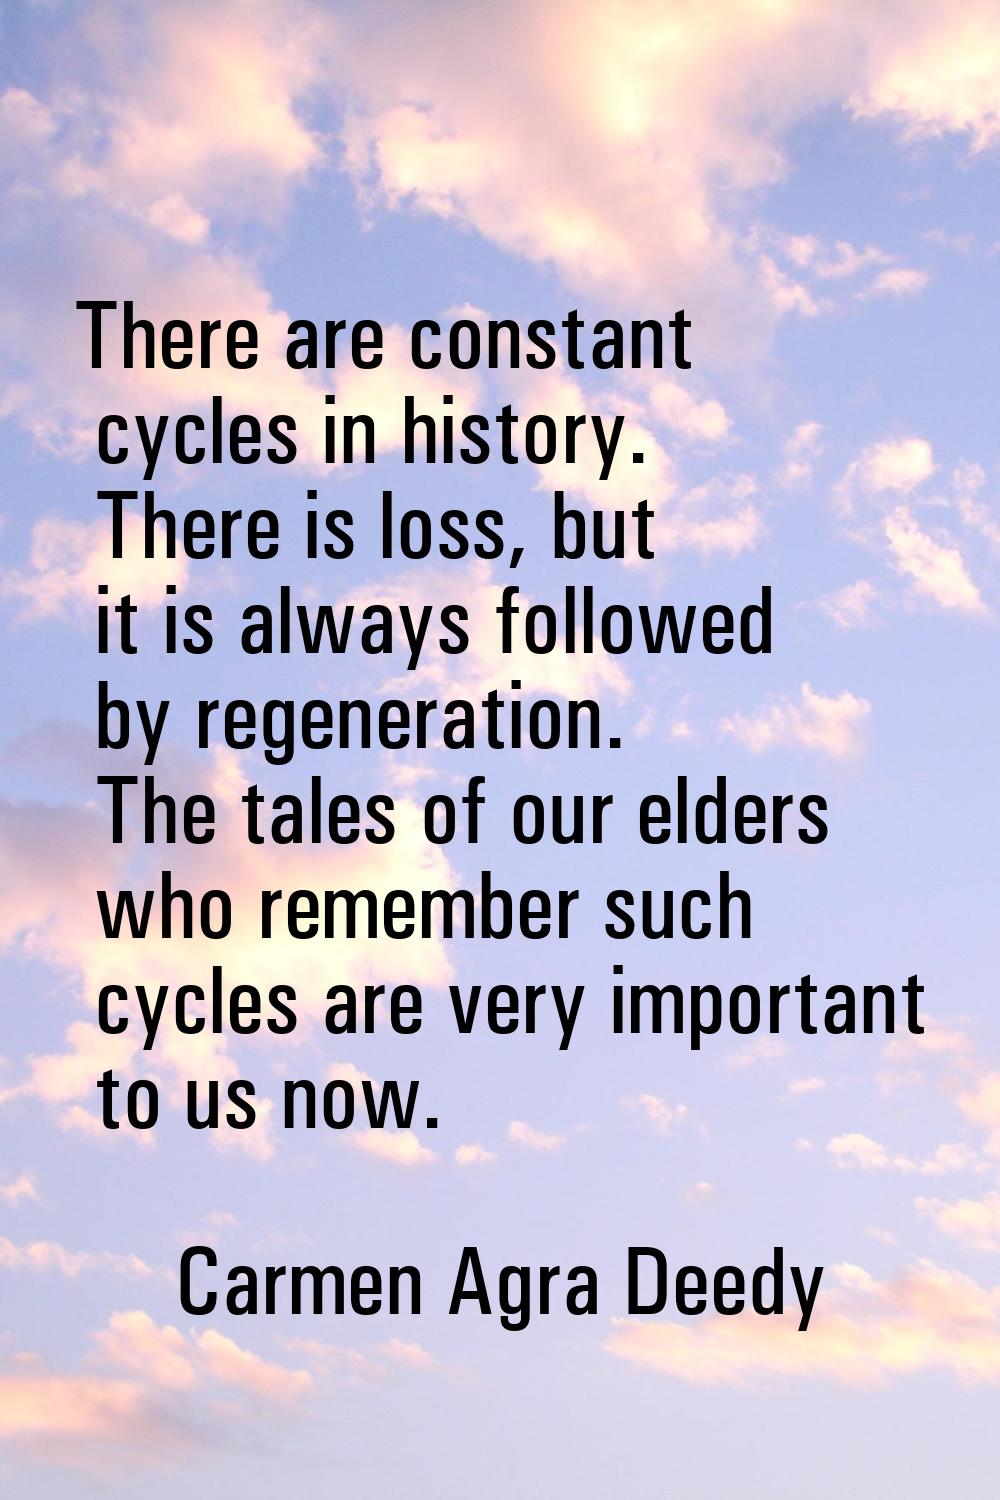 There are constant cycles in history. There is loss, but it is always followed by regeneration. The